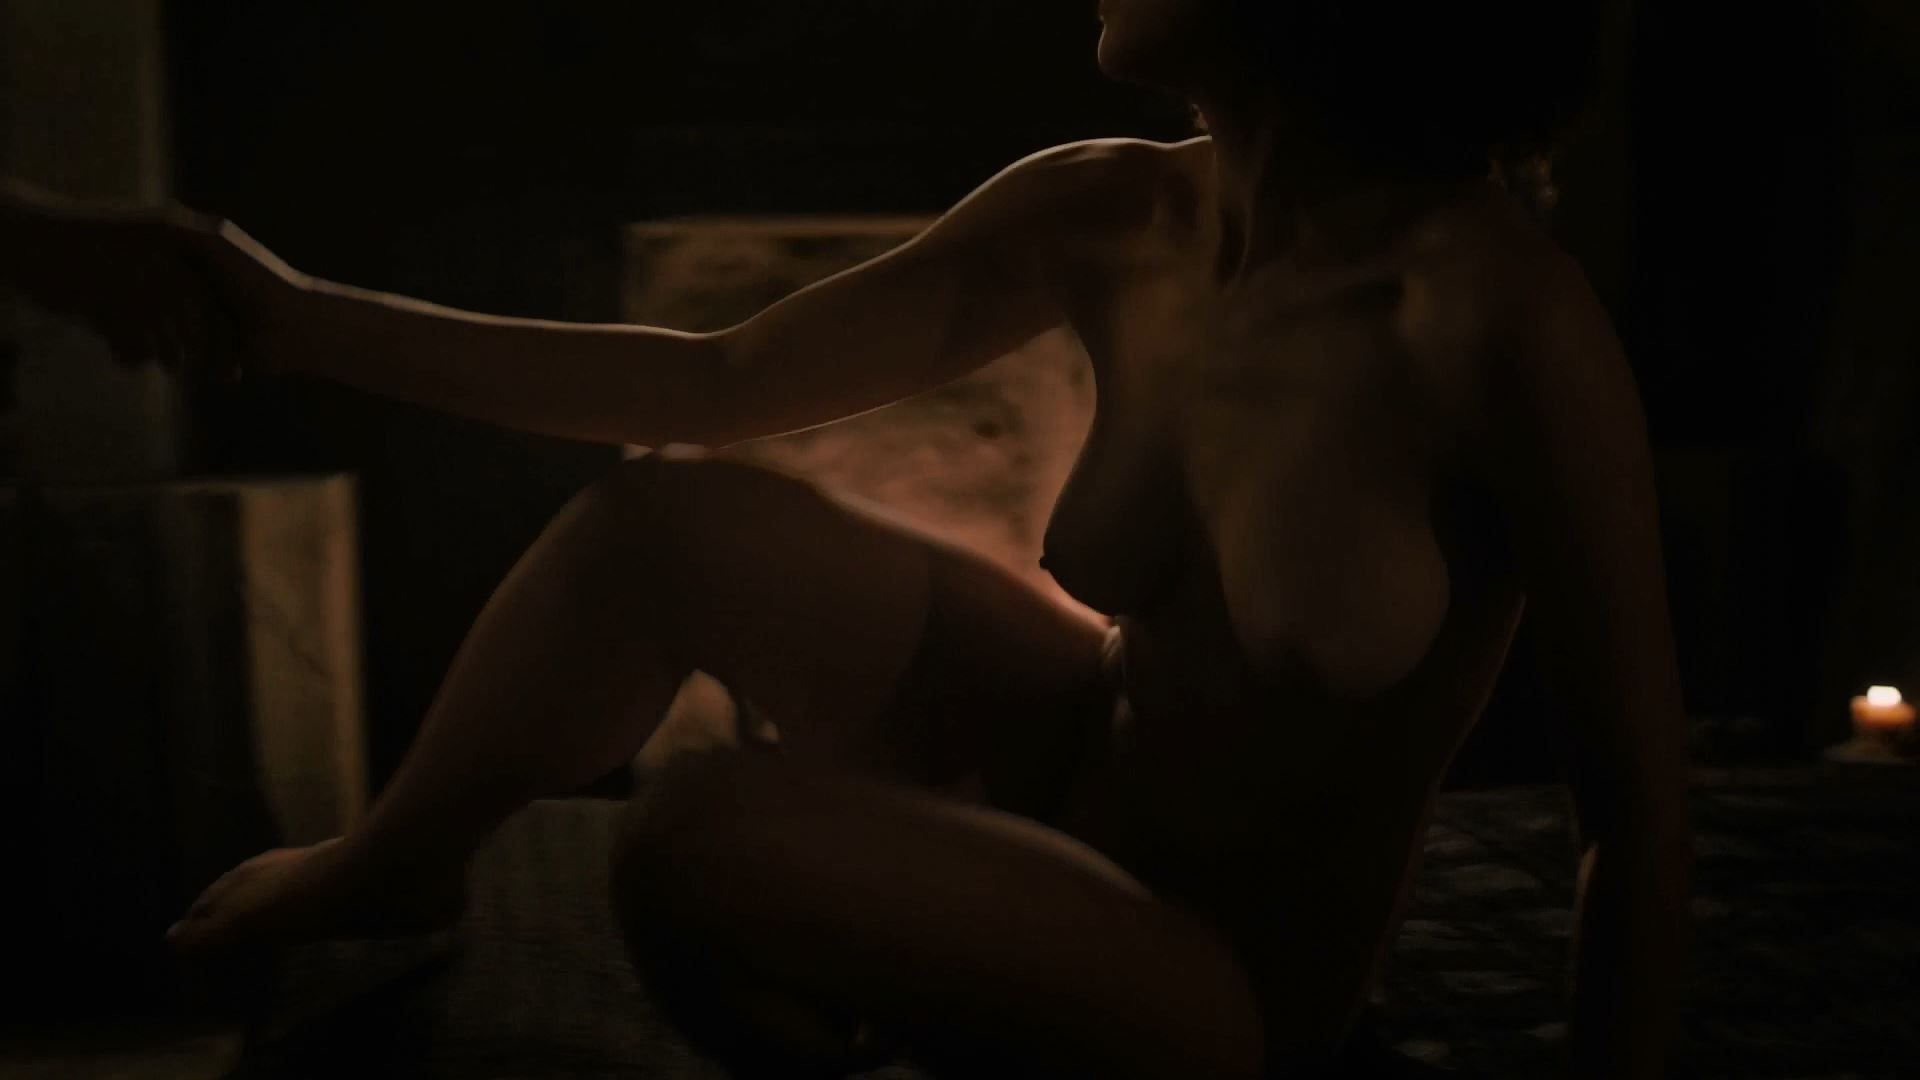 Nathalie Emmanuel Nude -
Game of Thrones (2017) s07e02 - 1080p